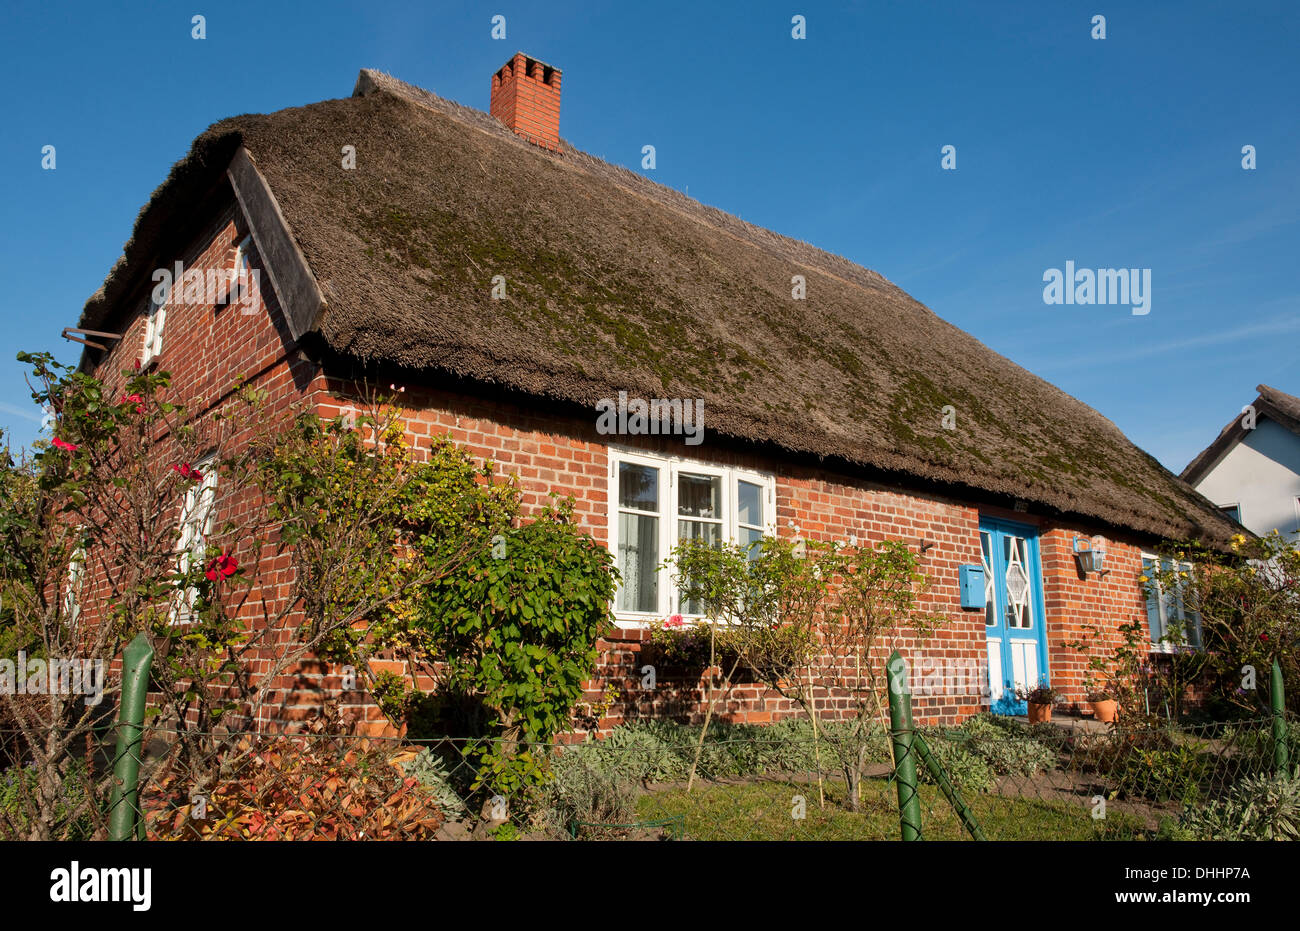 Thatched house, cottage, listed building, Groß Zicker, Rügen, Mecklenburg-Western Pomerania, Germany Stock Photo